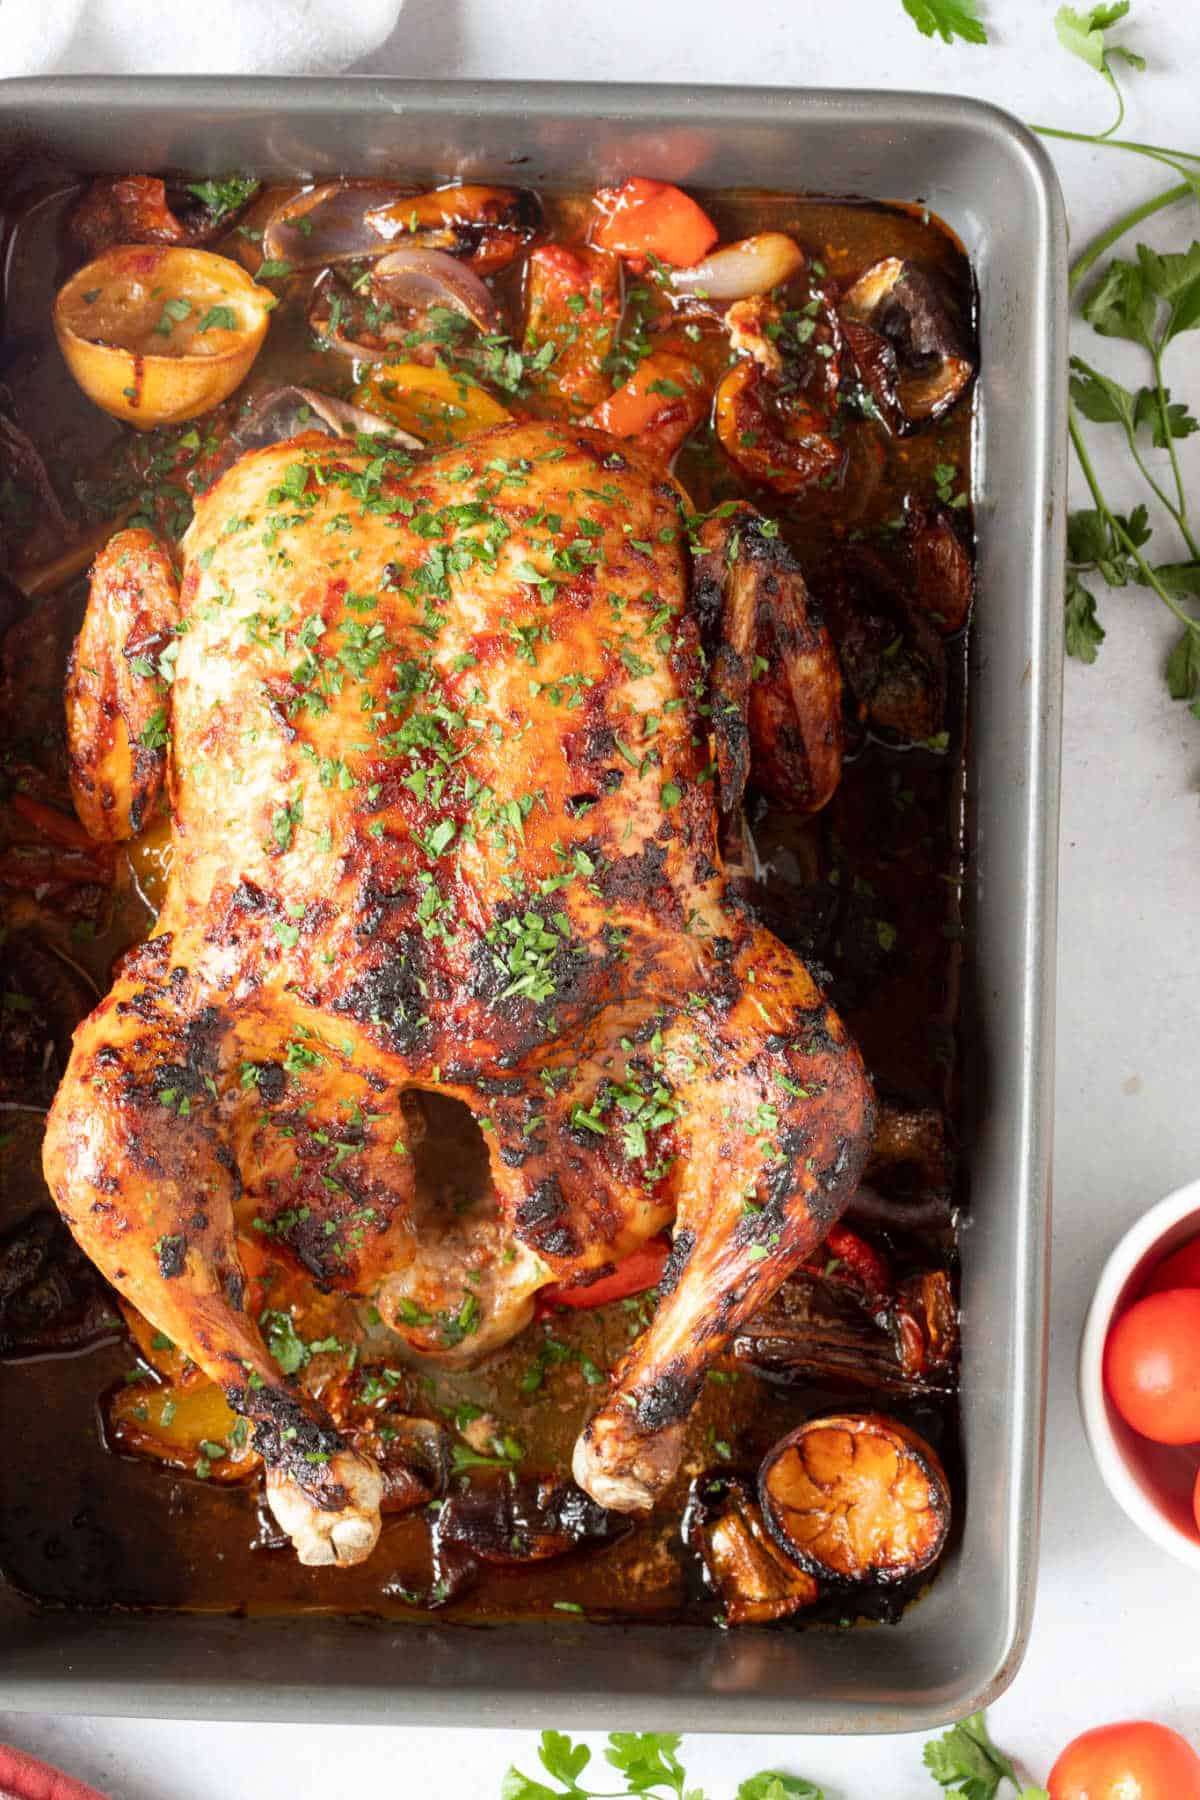 Whole chicken in roasting tin.